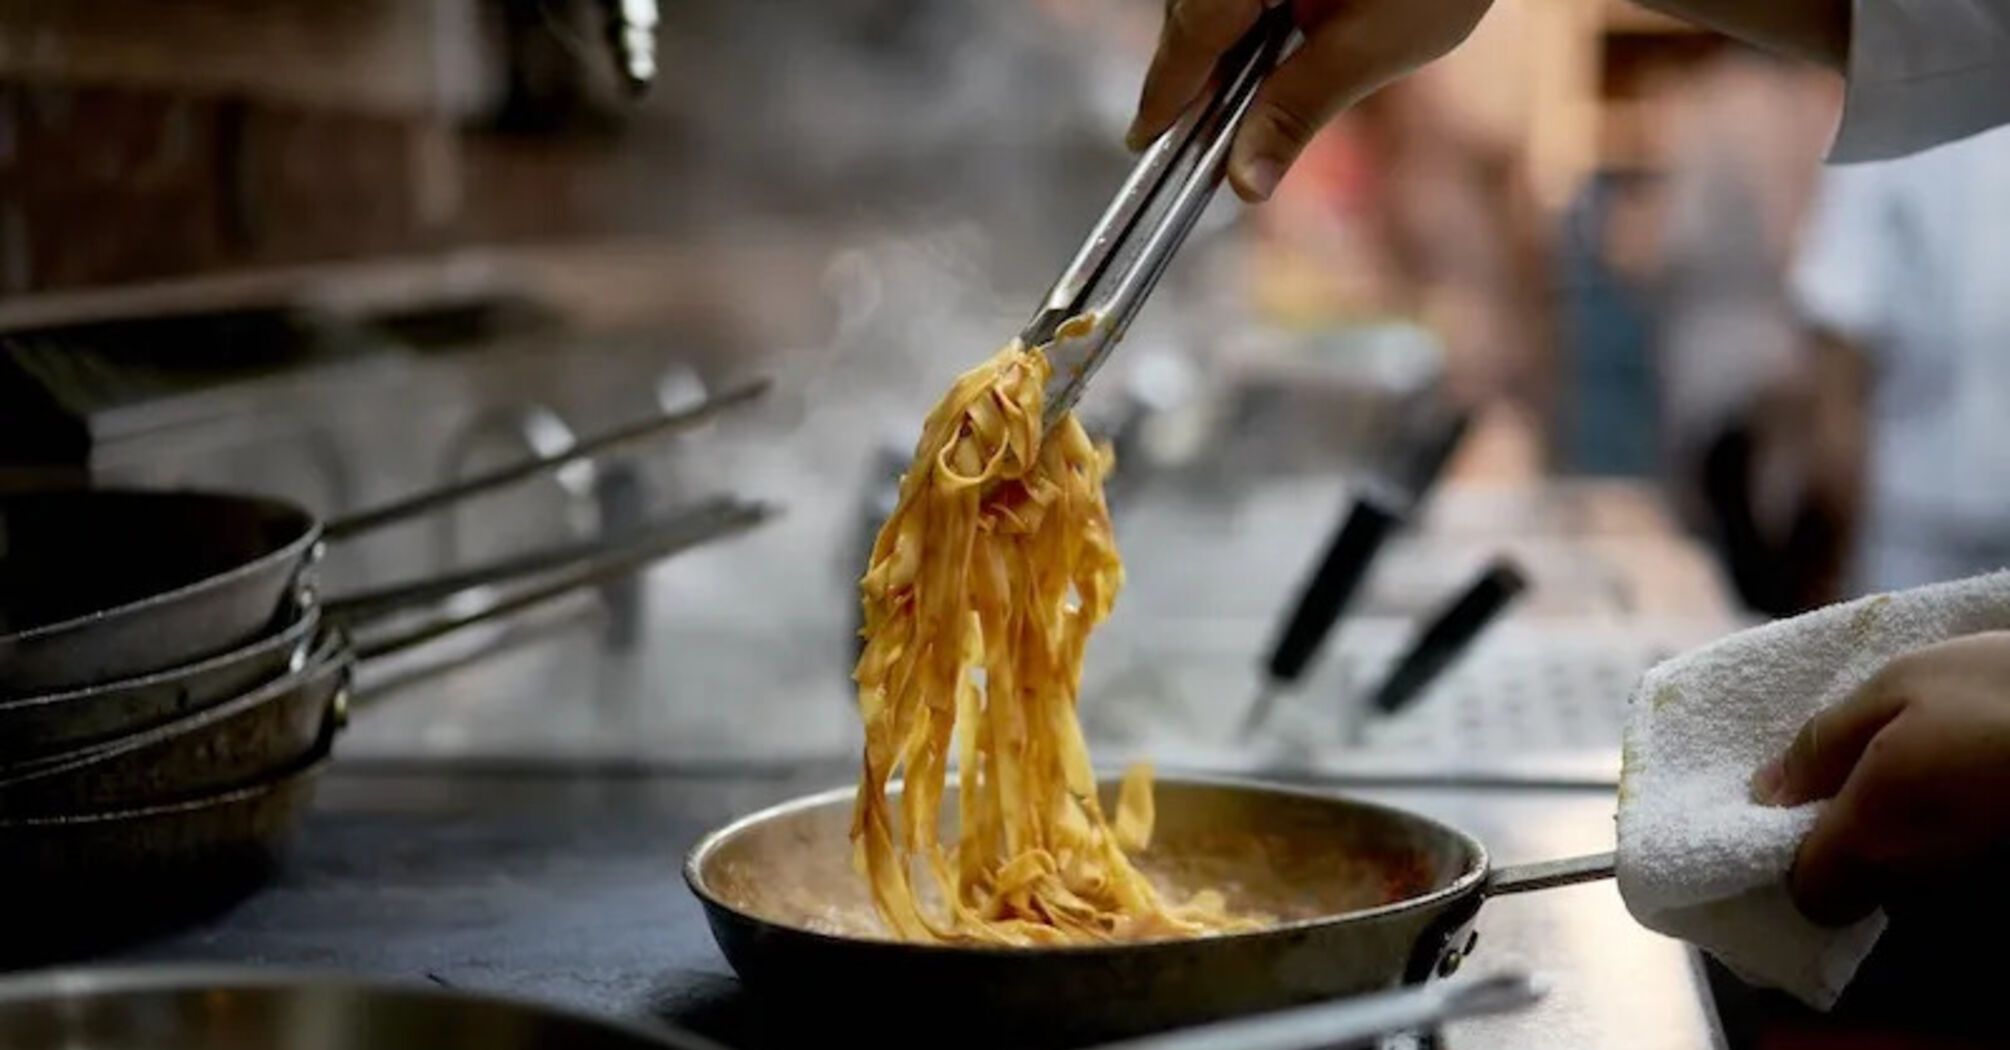 Why experienced chefs fry pasta before cooking